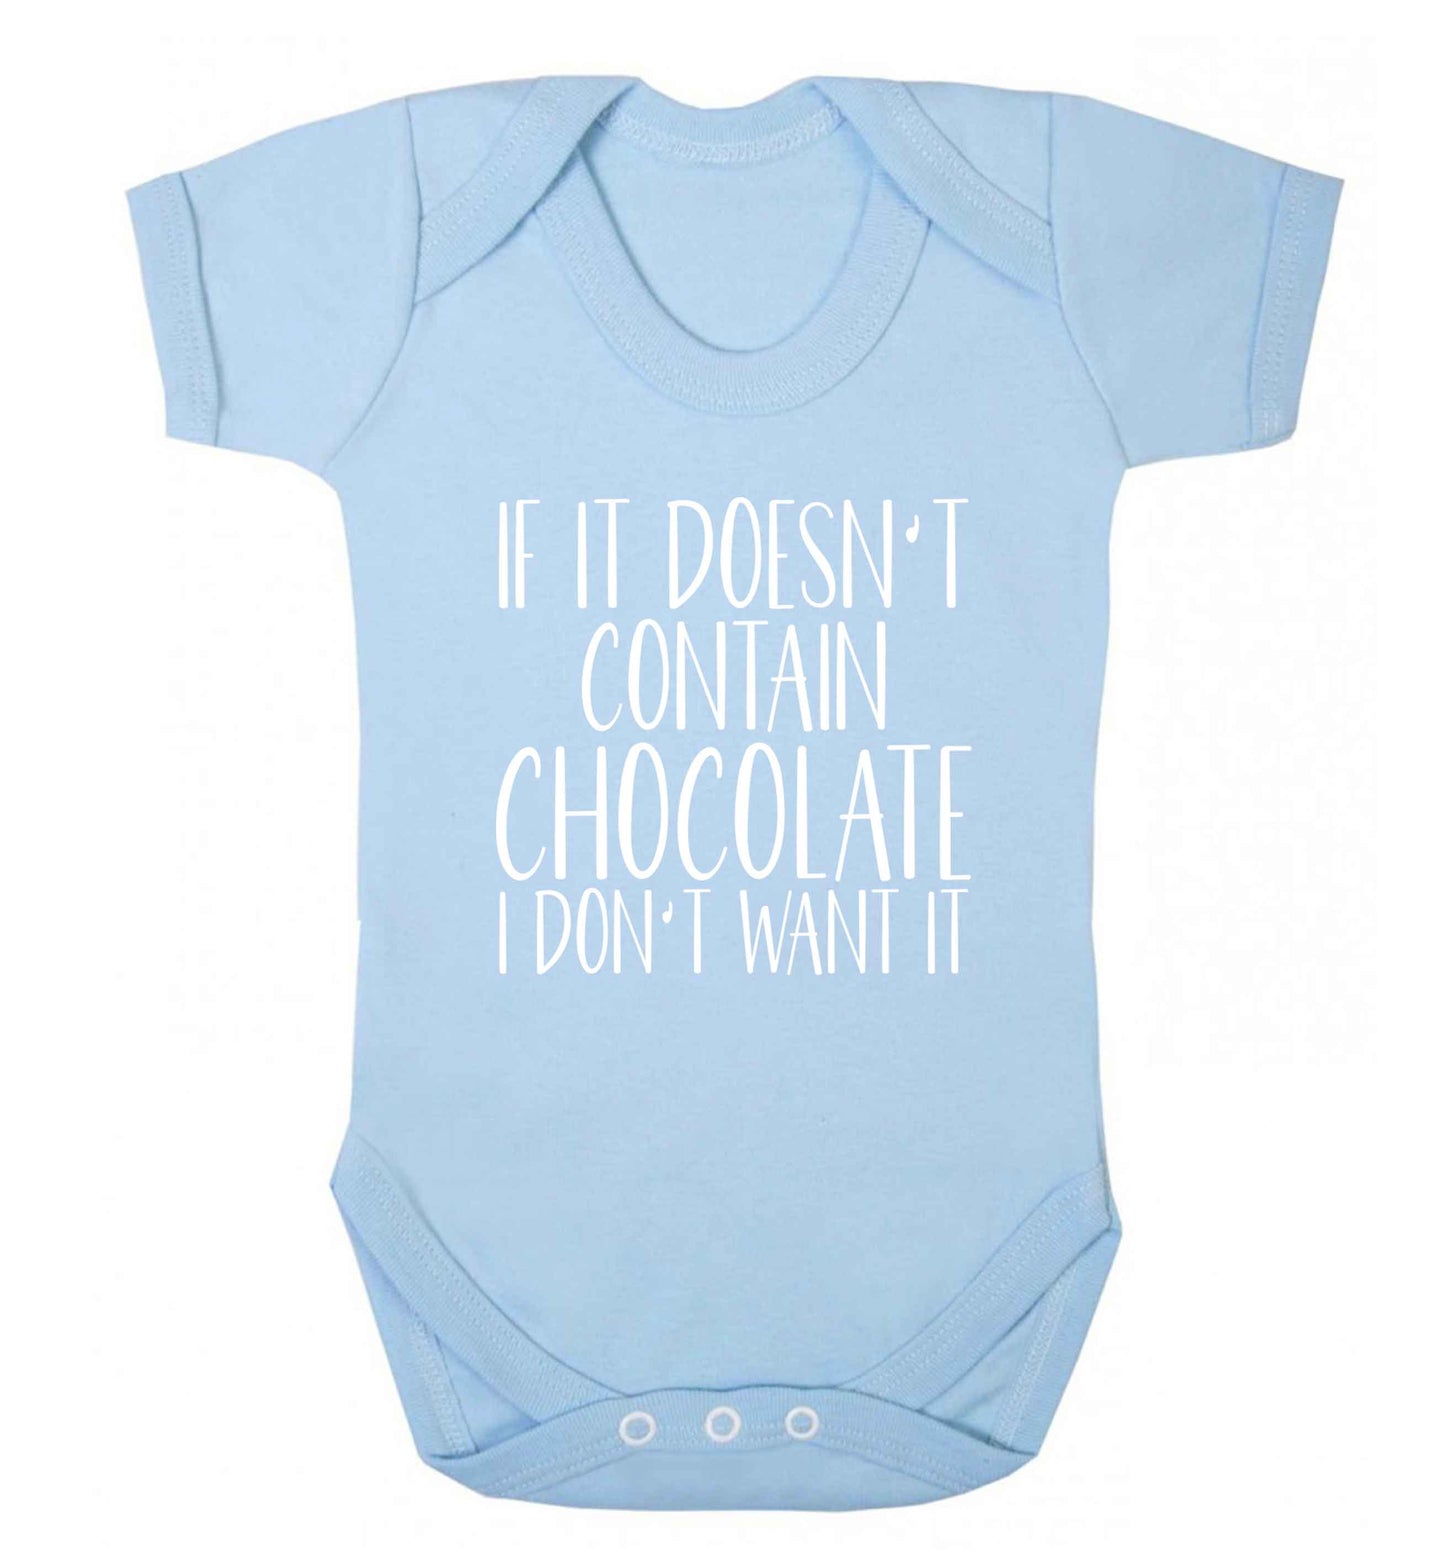 If it doesn't contain chocolate I don't want it baby vest pale blue 18-24 months